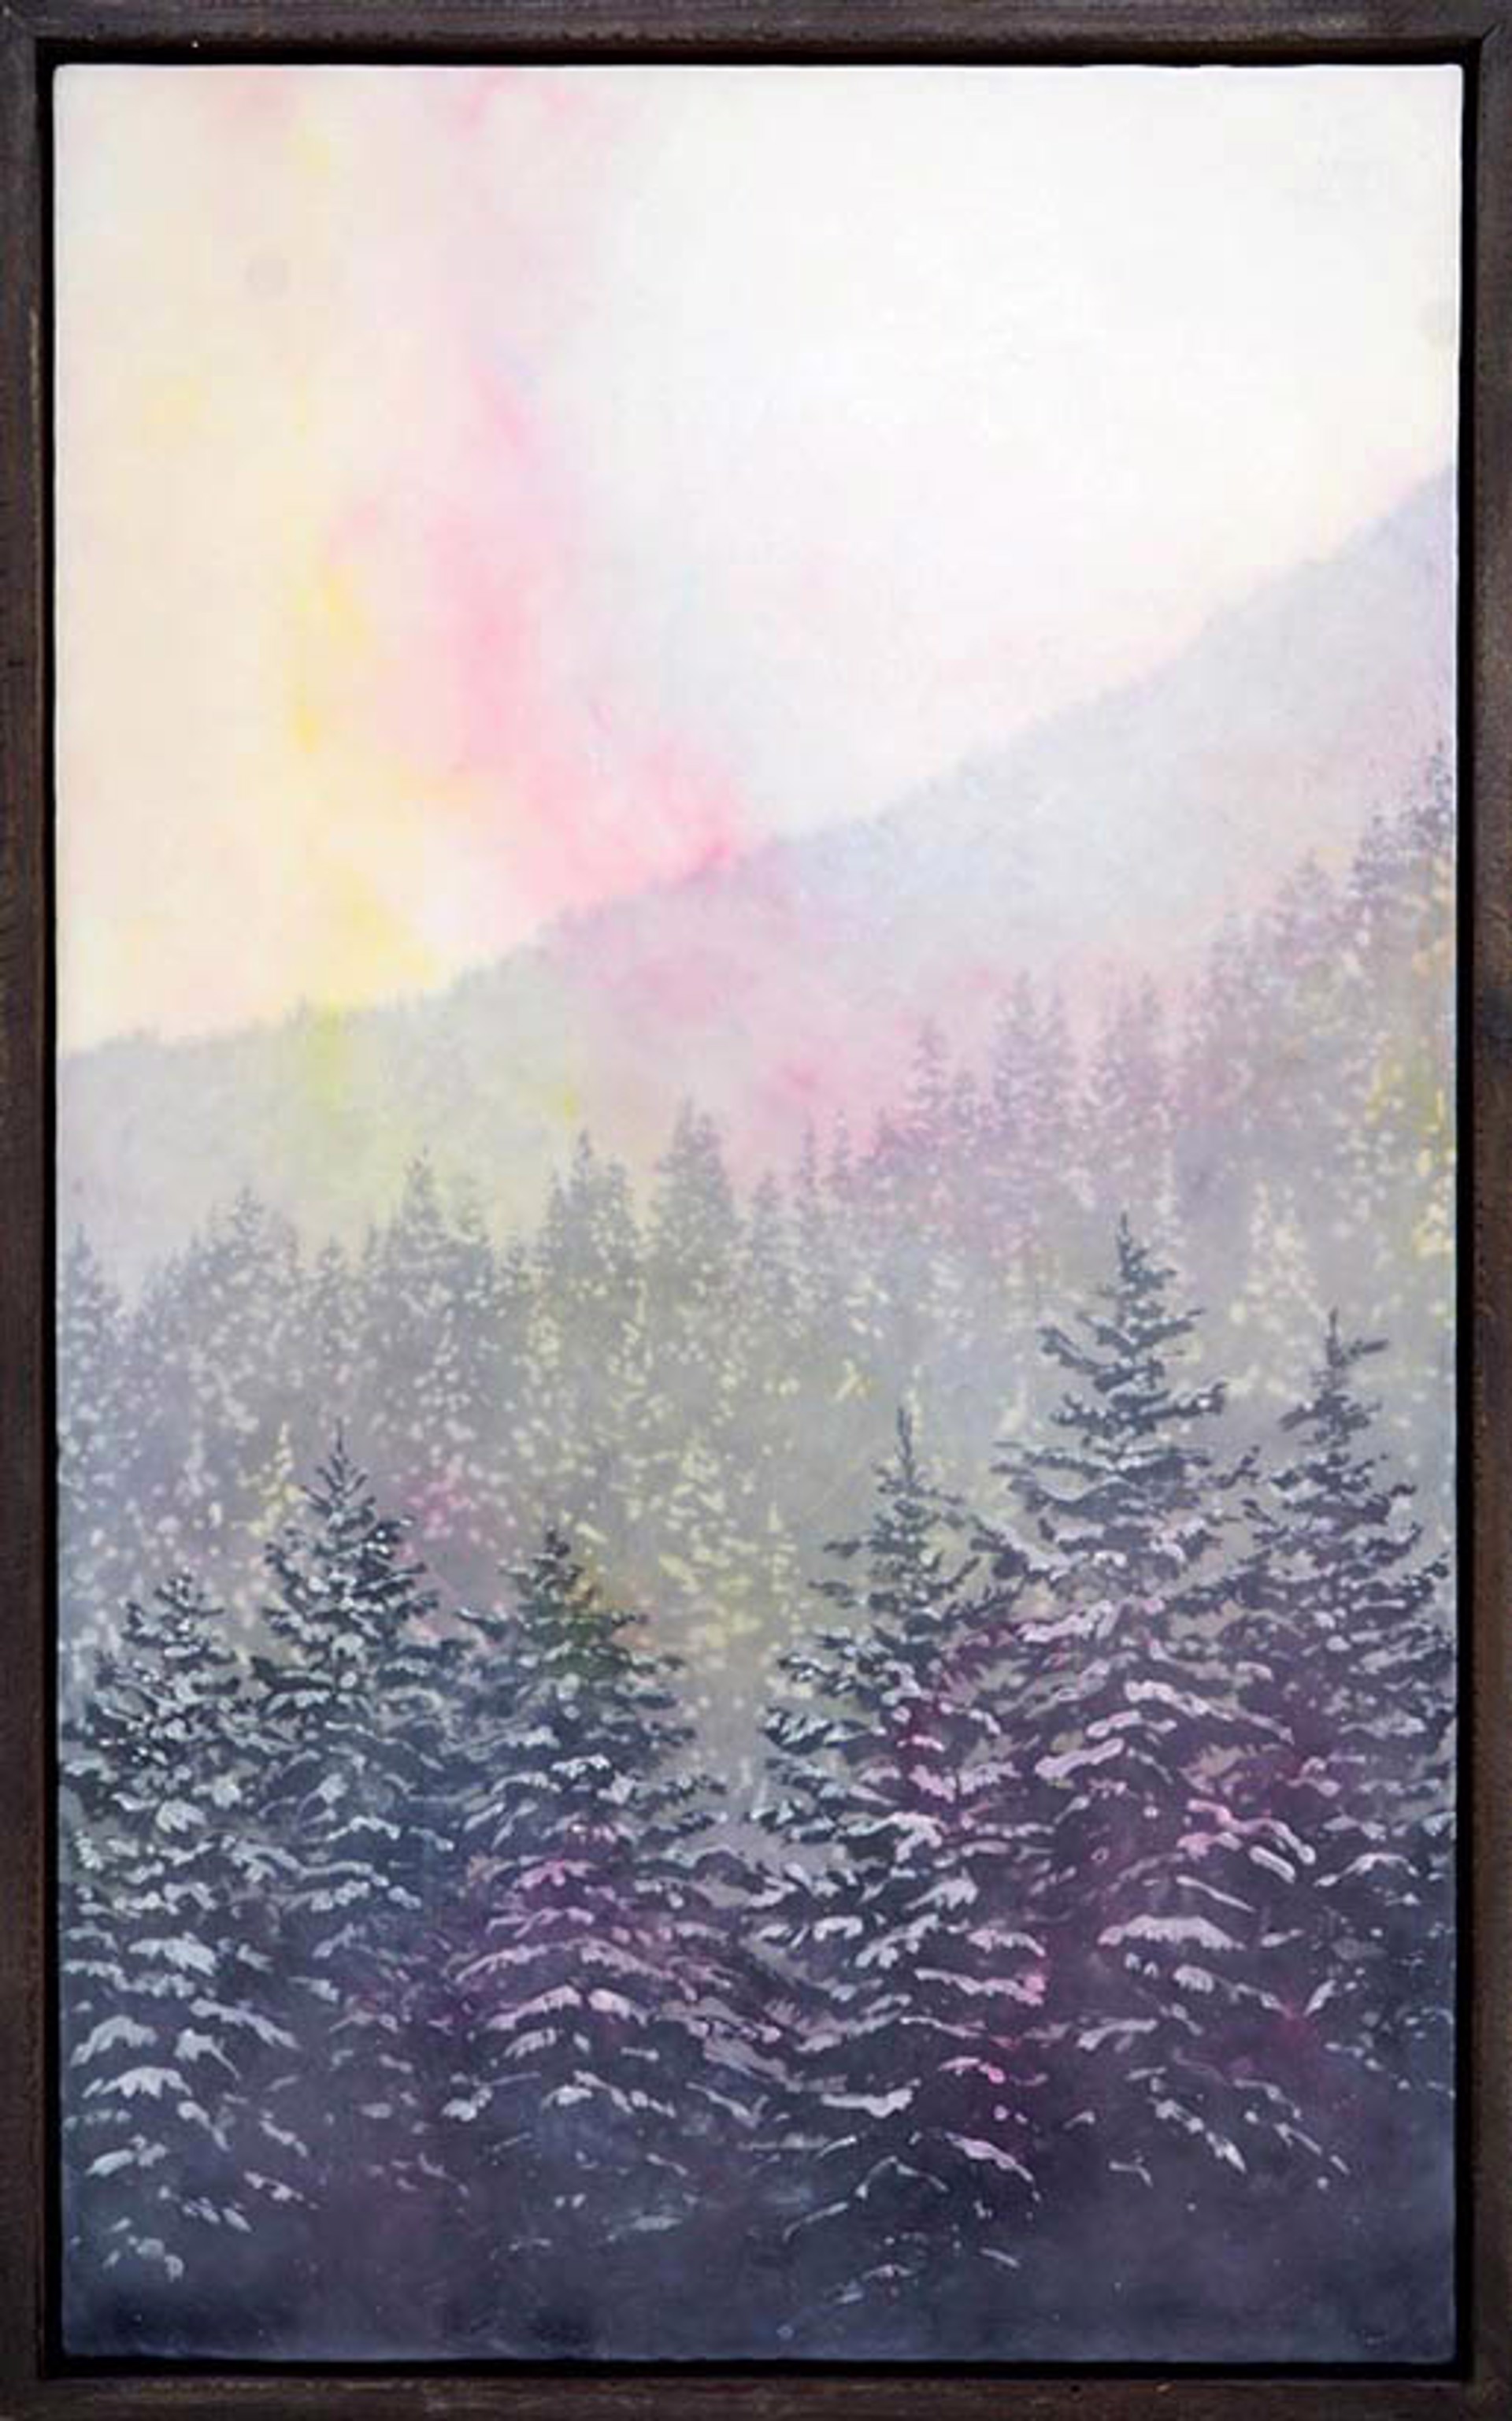 Original Encaustic Painting By Bridgette Meinhold Mountain Winter Landscape With Snowy Pine Trees With A Pink And Yellow Hue